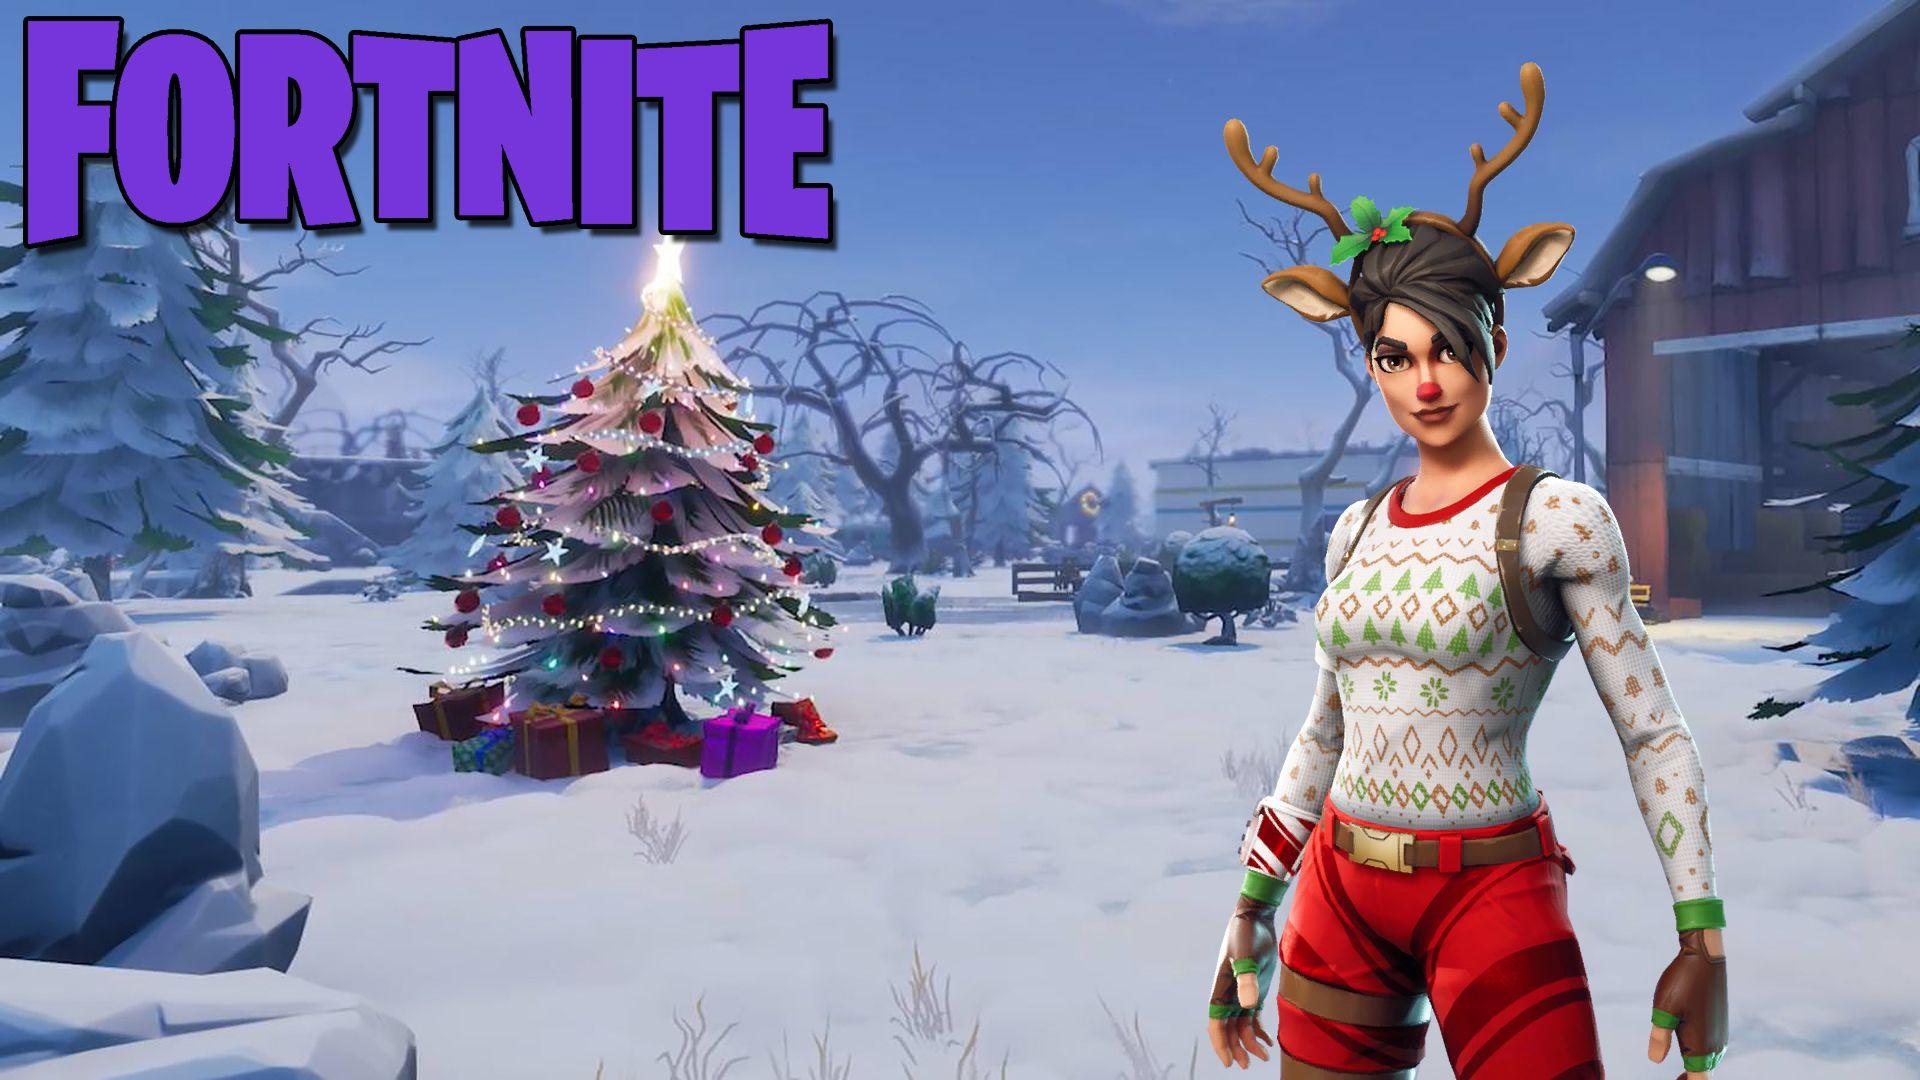 Red Nosed Raider Fortnite Outfit Skin How to Get + News